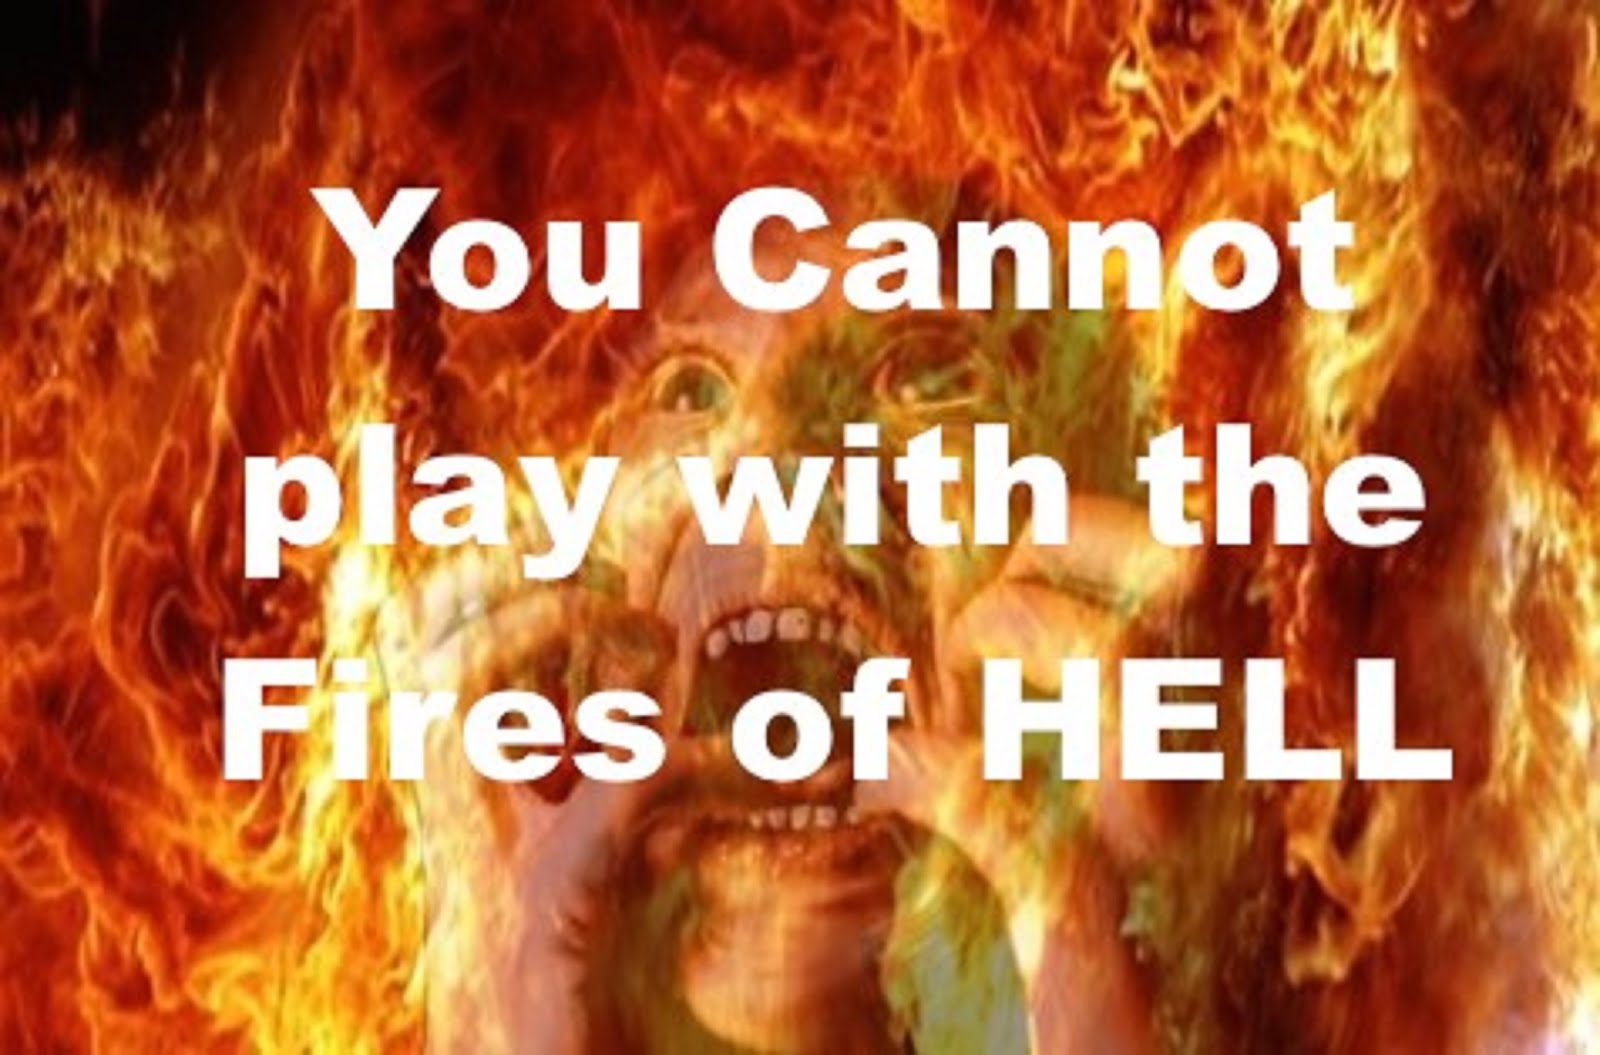 8. YOU CANNOT PLAY WITH THE FIRES OF HELL